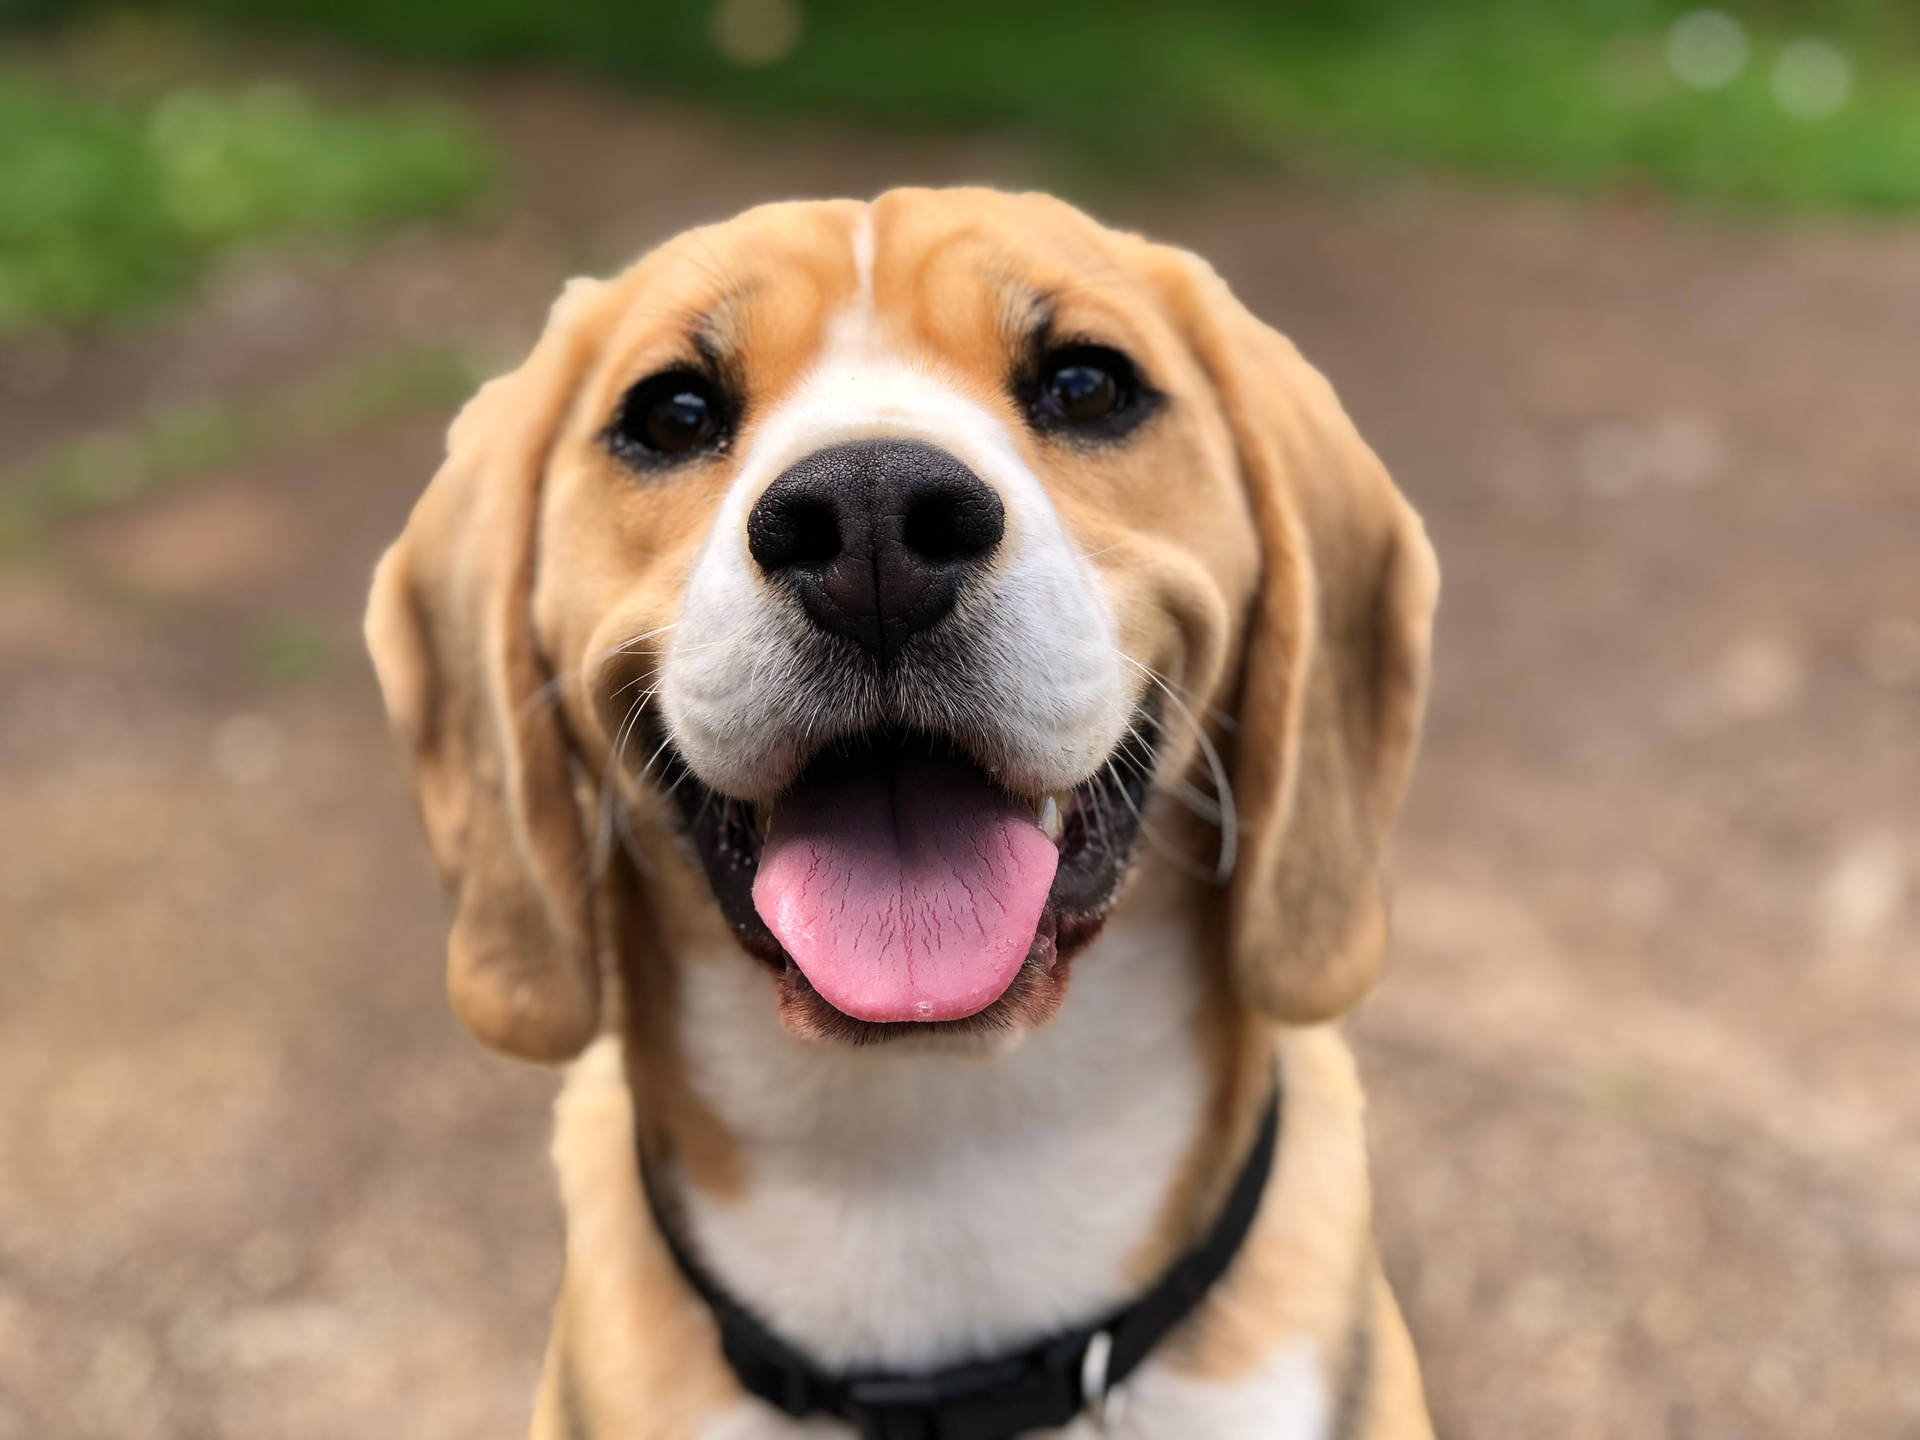 Close-up Beagle dog face with tongue out wallpaper.